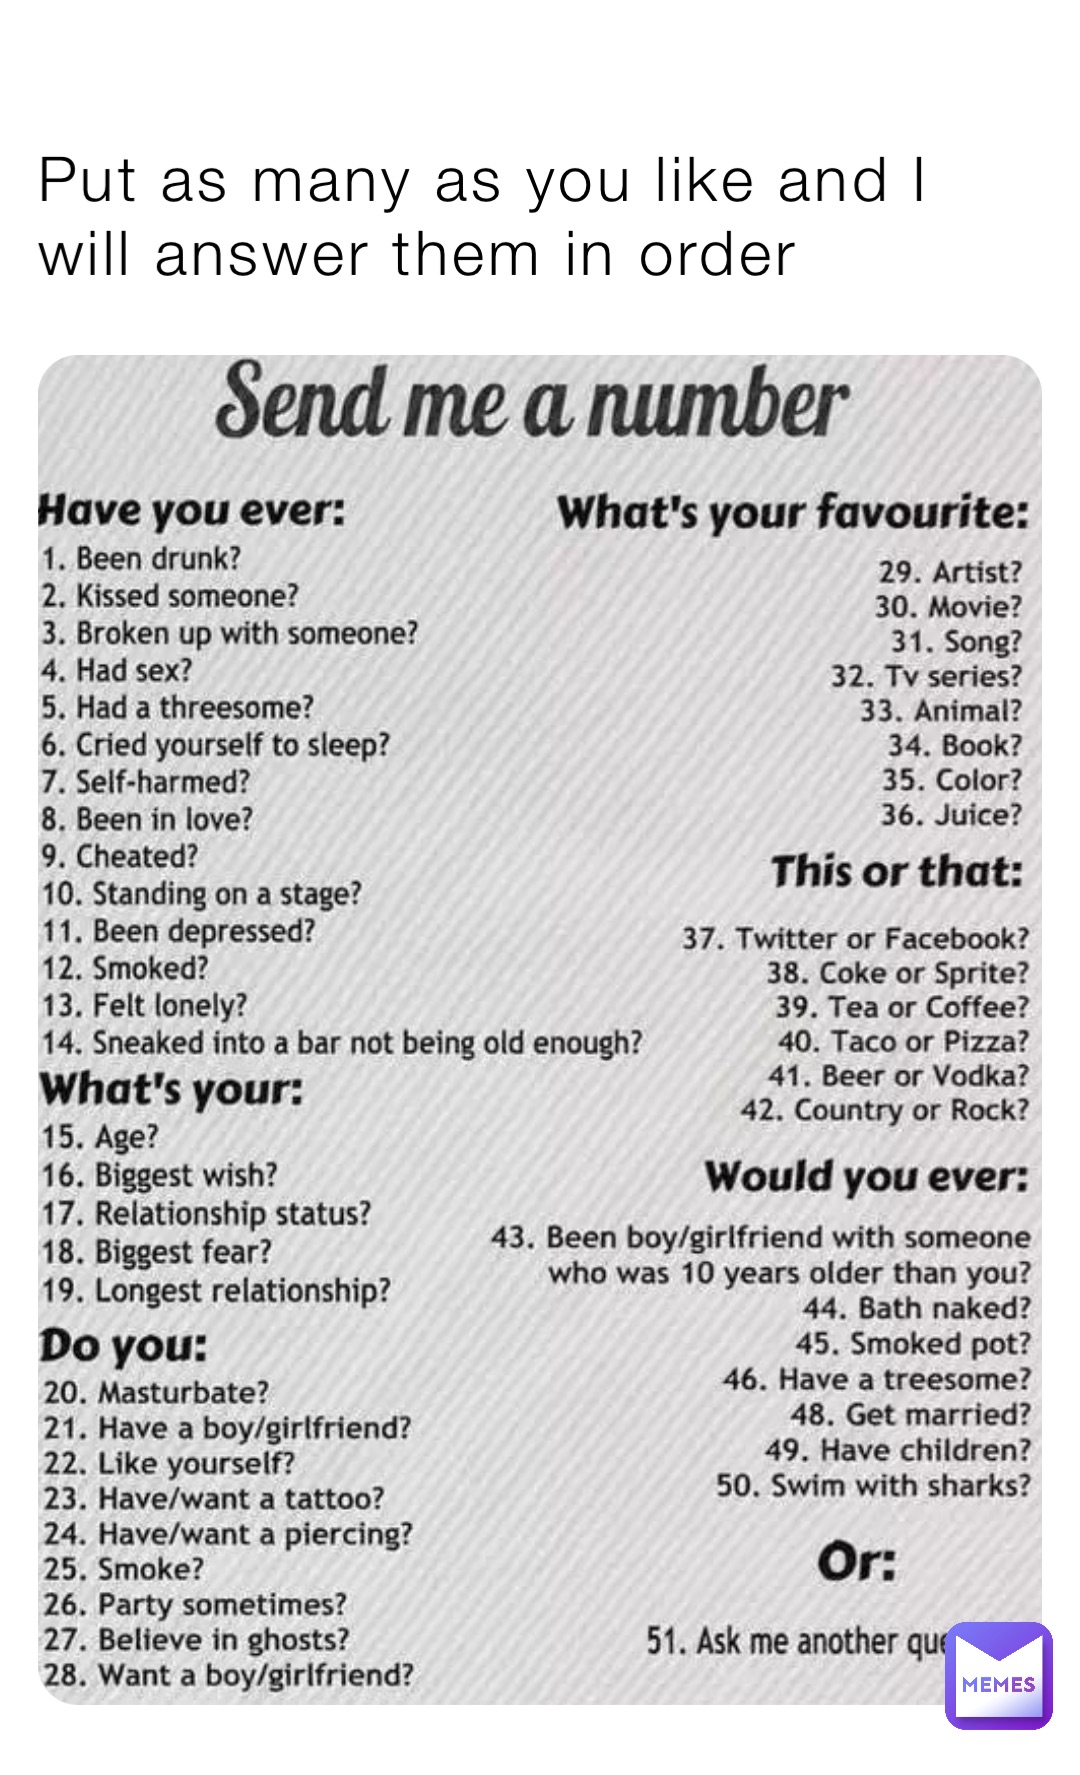 Put as many as you like and I will answer them in order